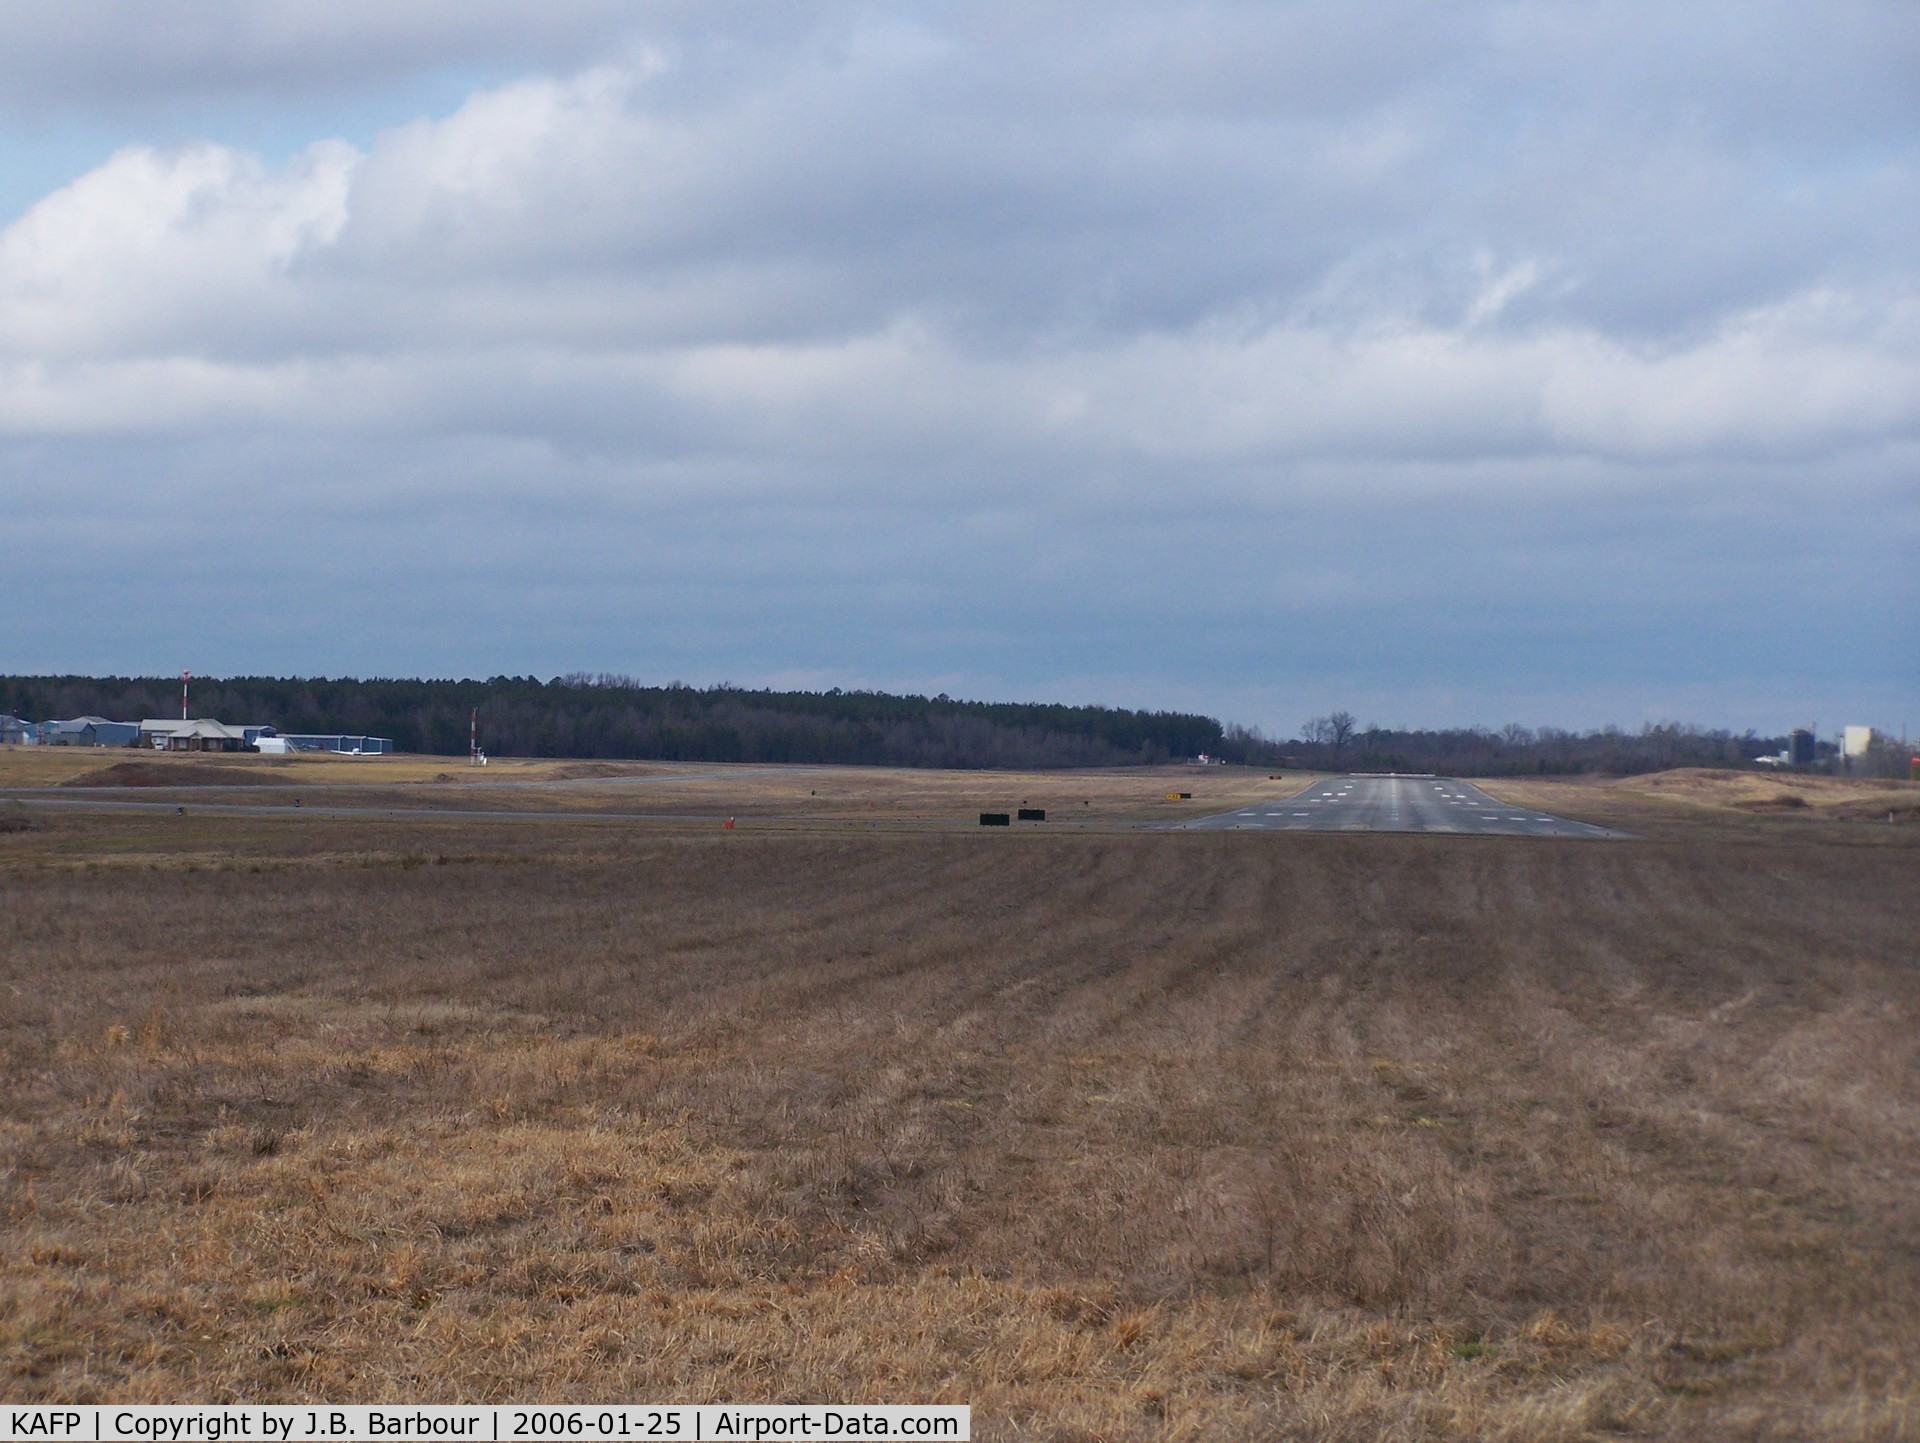 Anson County -  Jeff Cloud Field Airport (AFP) - Nice small airport